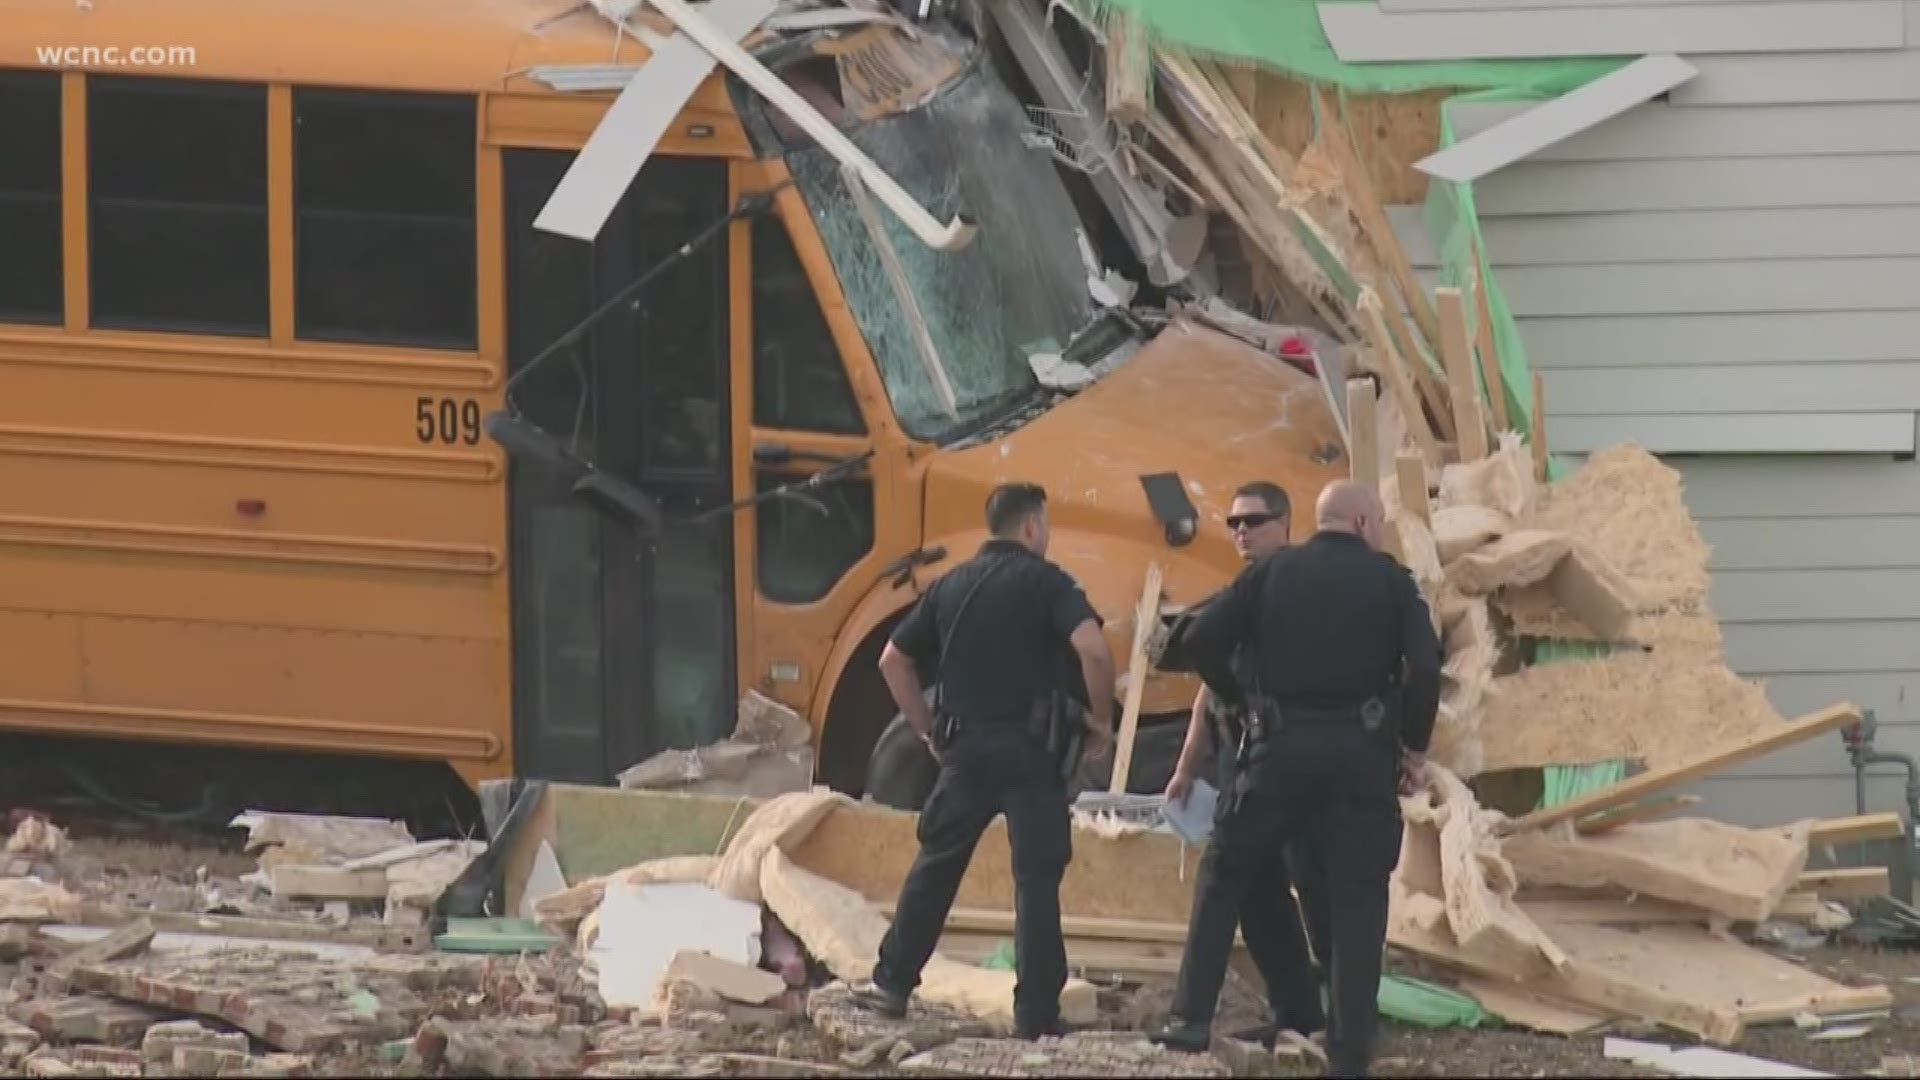 After a scary school bus accident this morning, clean-up efforts are underway after the bus ran off the road and slammed right into a building near Uptown Charlotte.